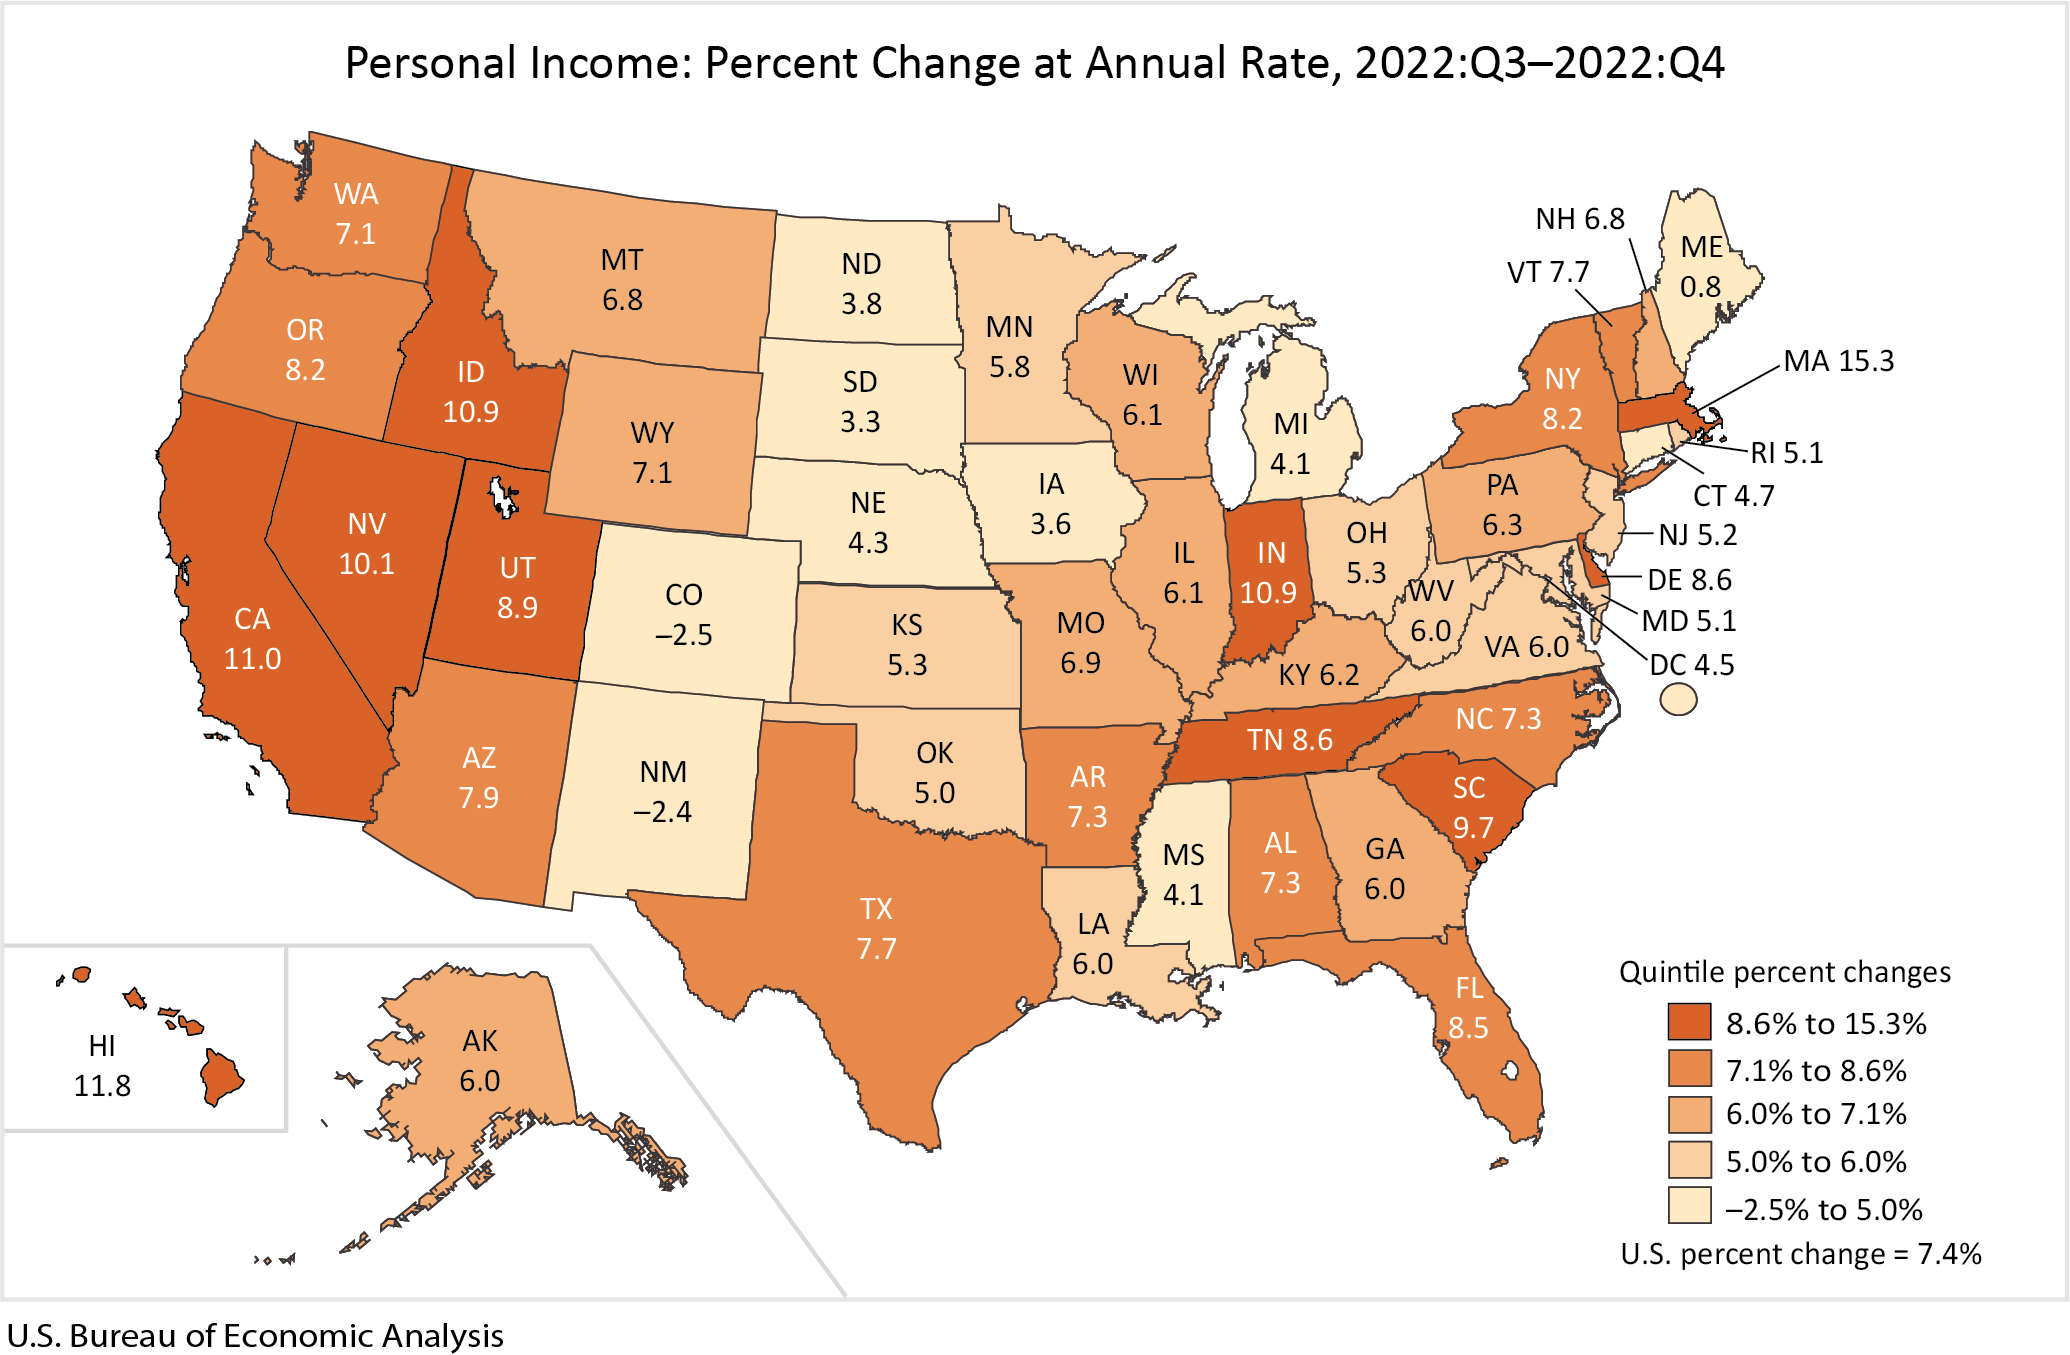 Personal Income: Percent Change at Annual Rate, 2022:Q3-2022:Q4